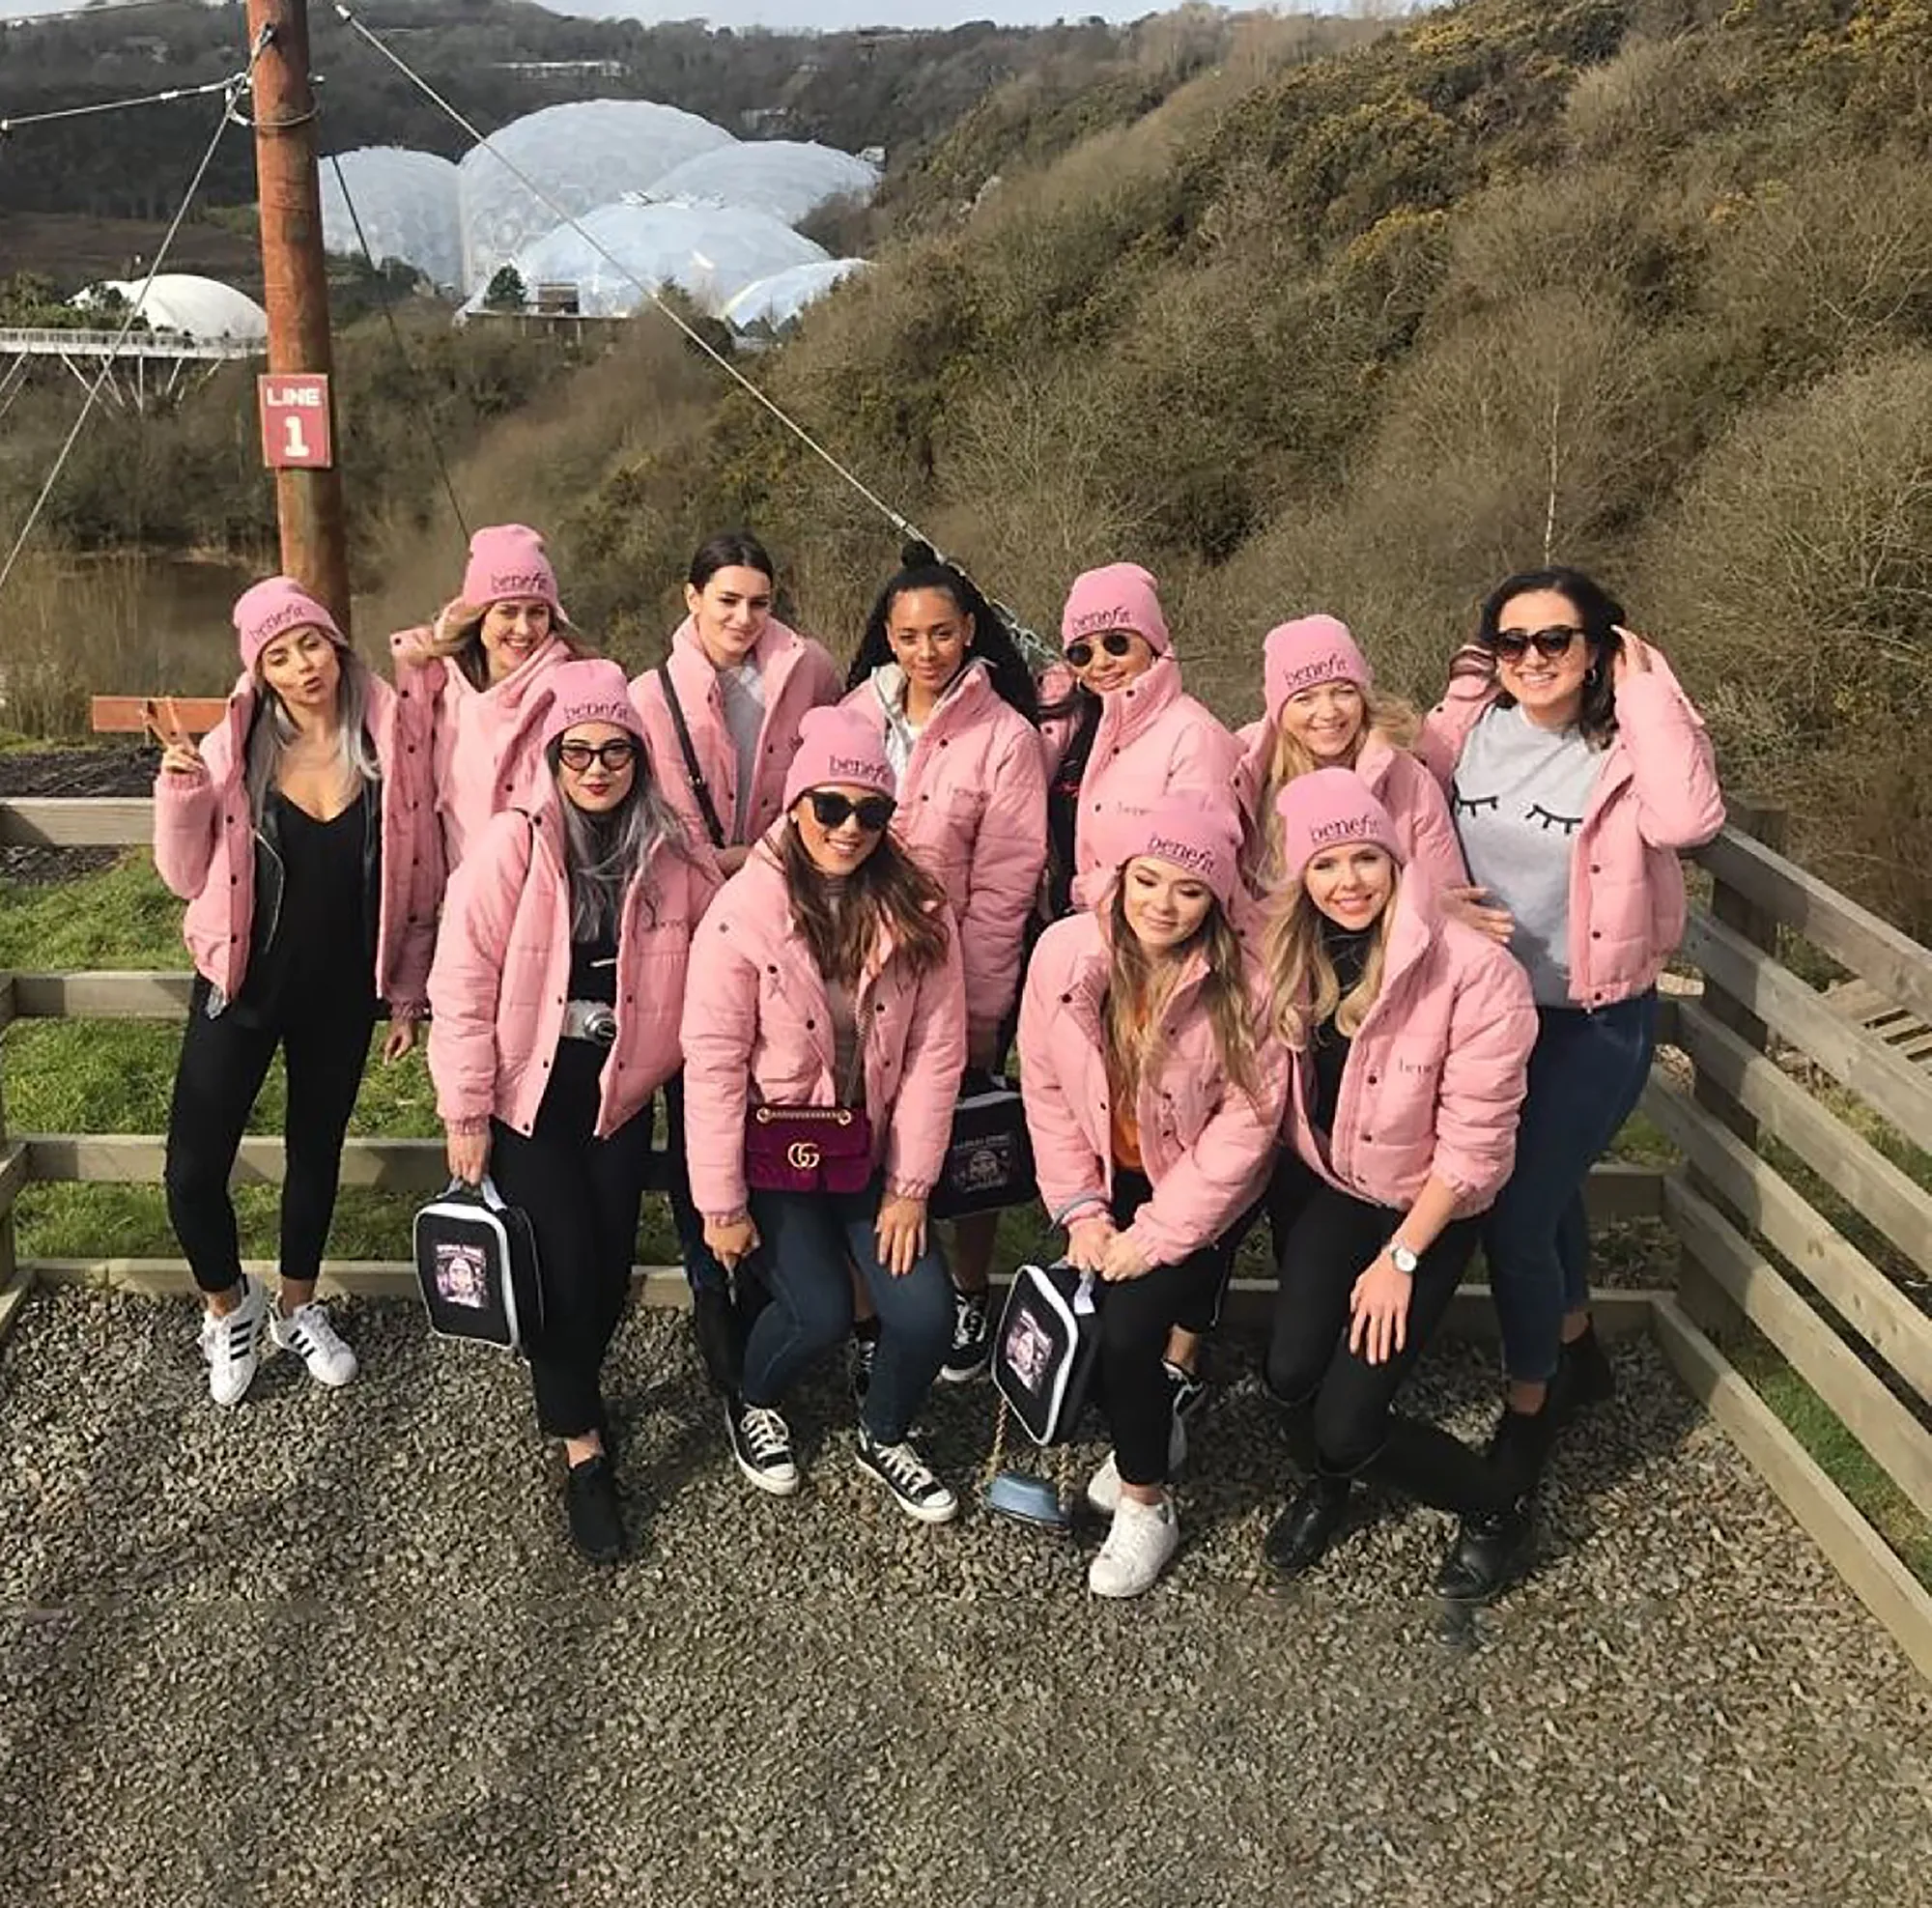 Hen do day out in Cornwall at hangloose eden